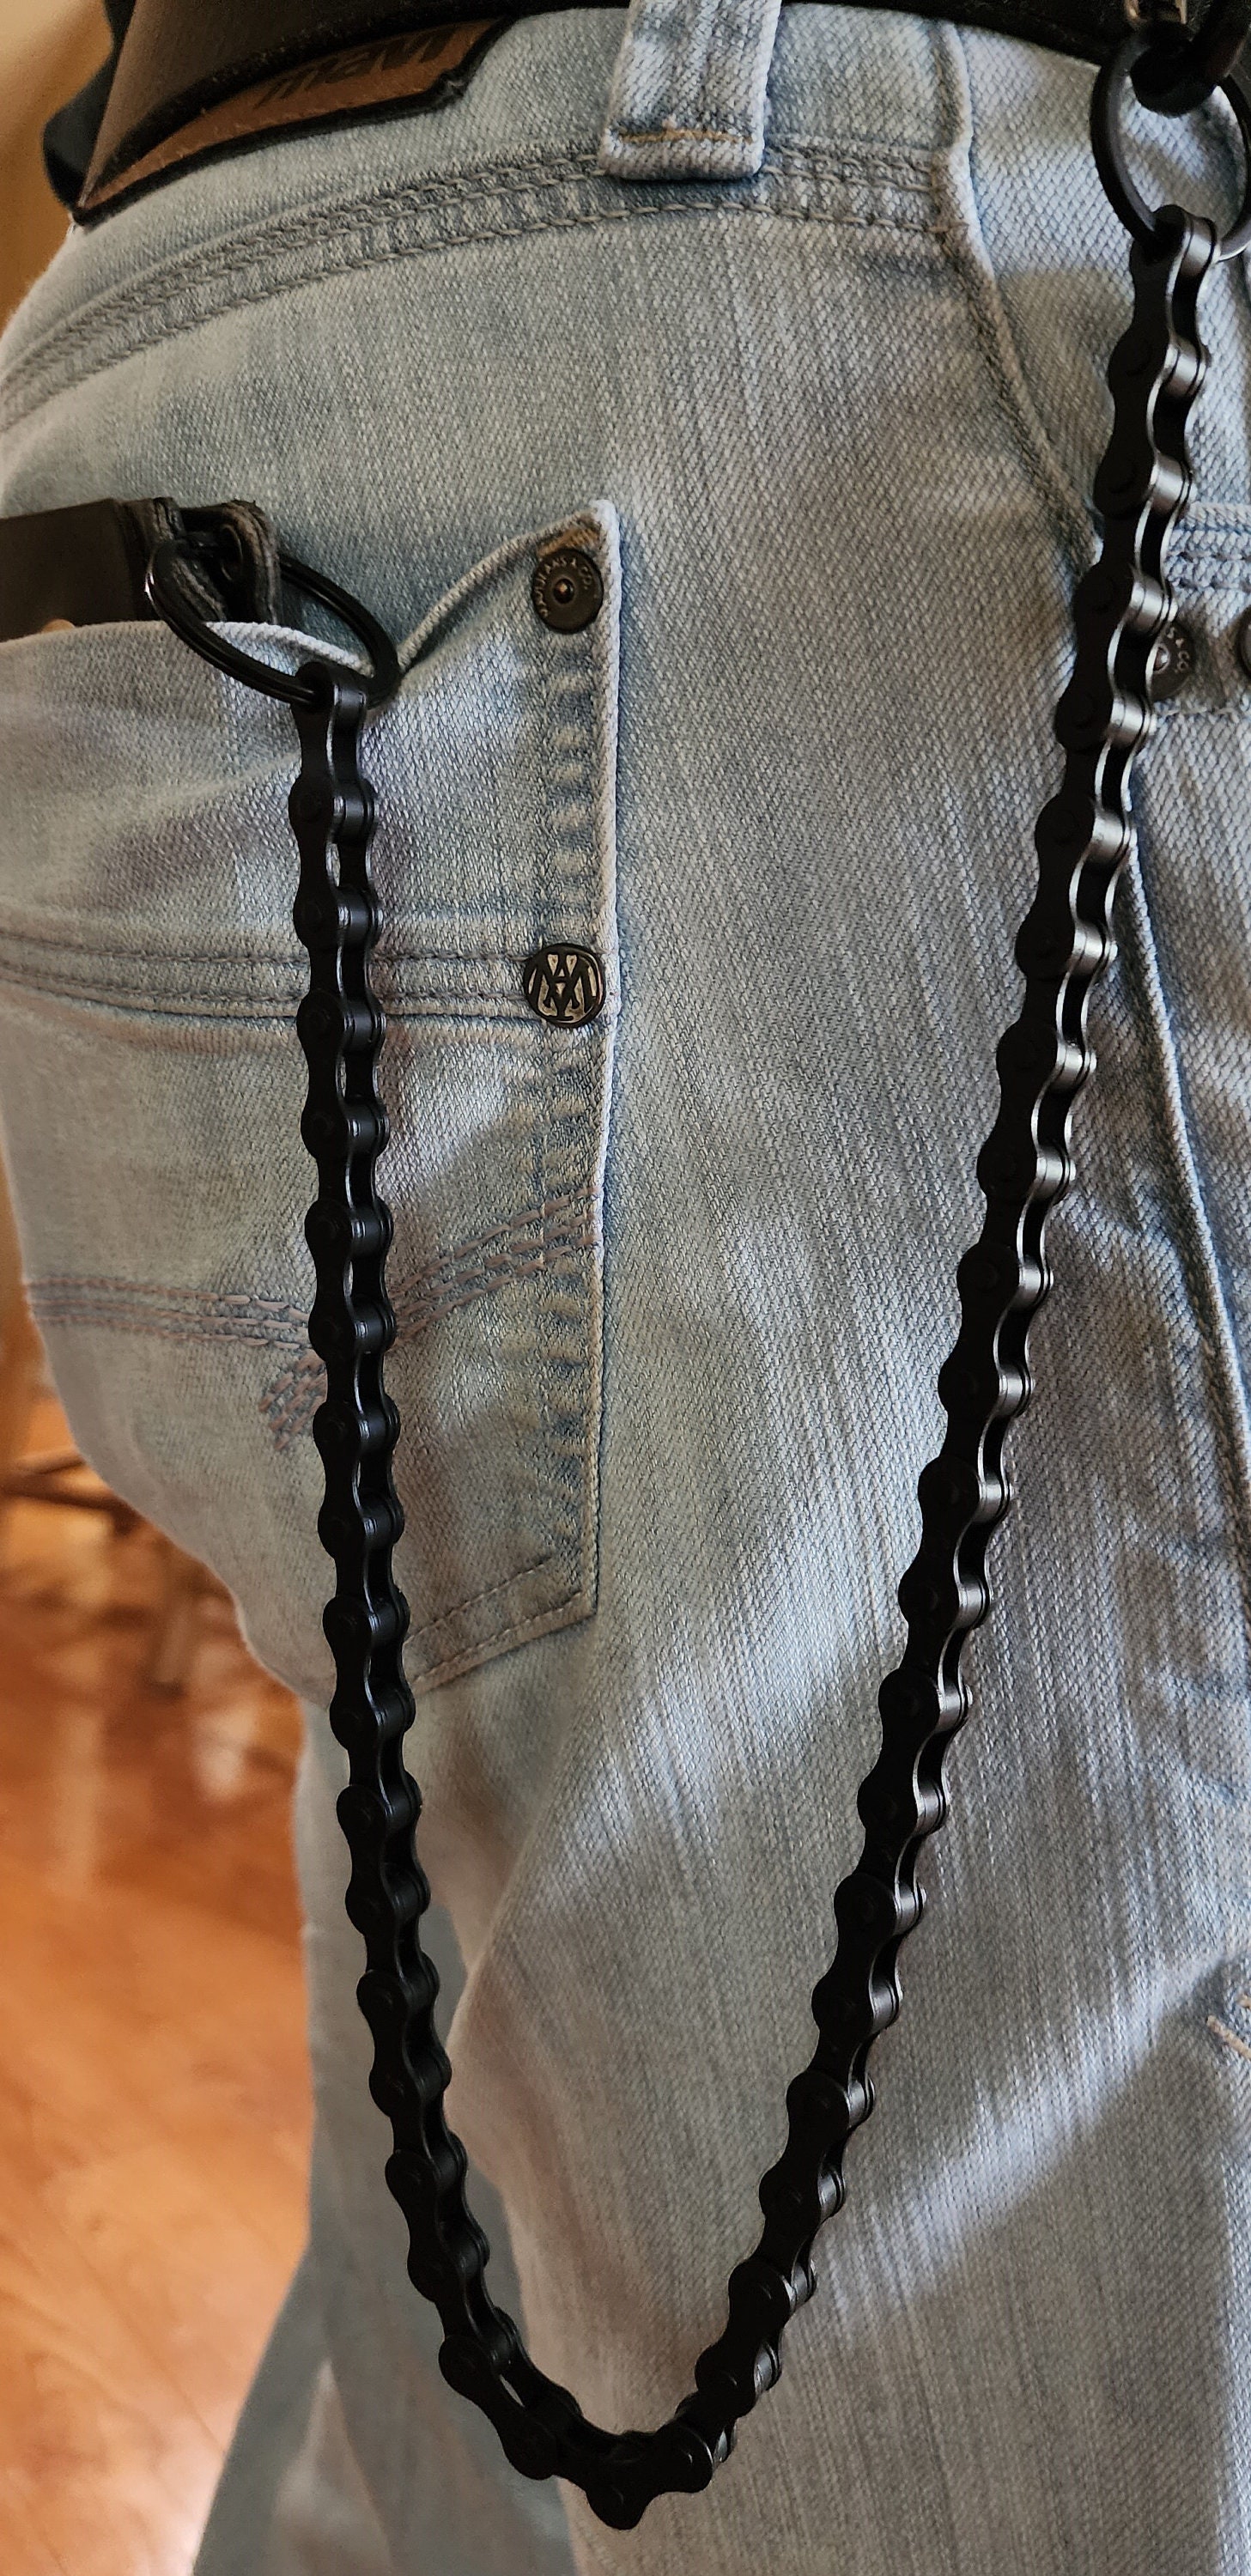 Biker Replacement Chain for Wallet